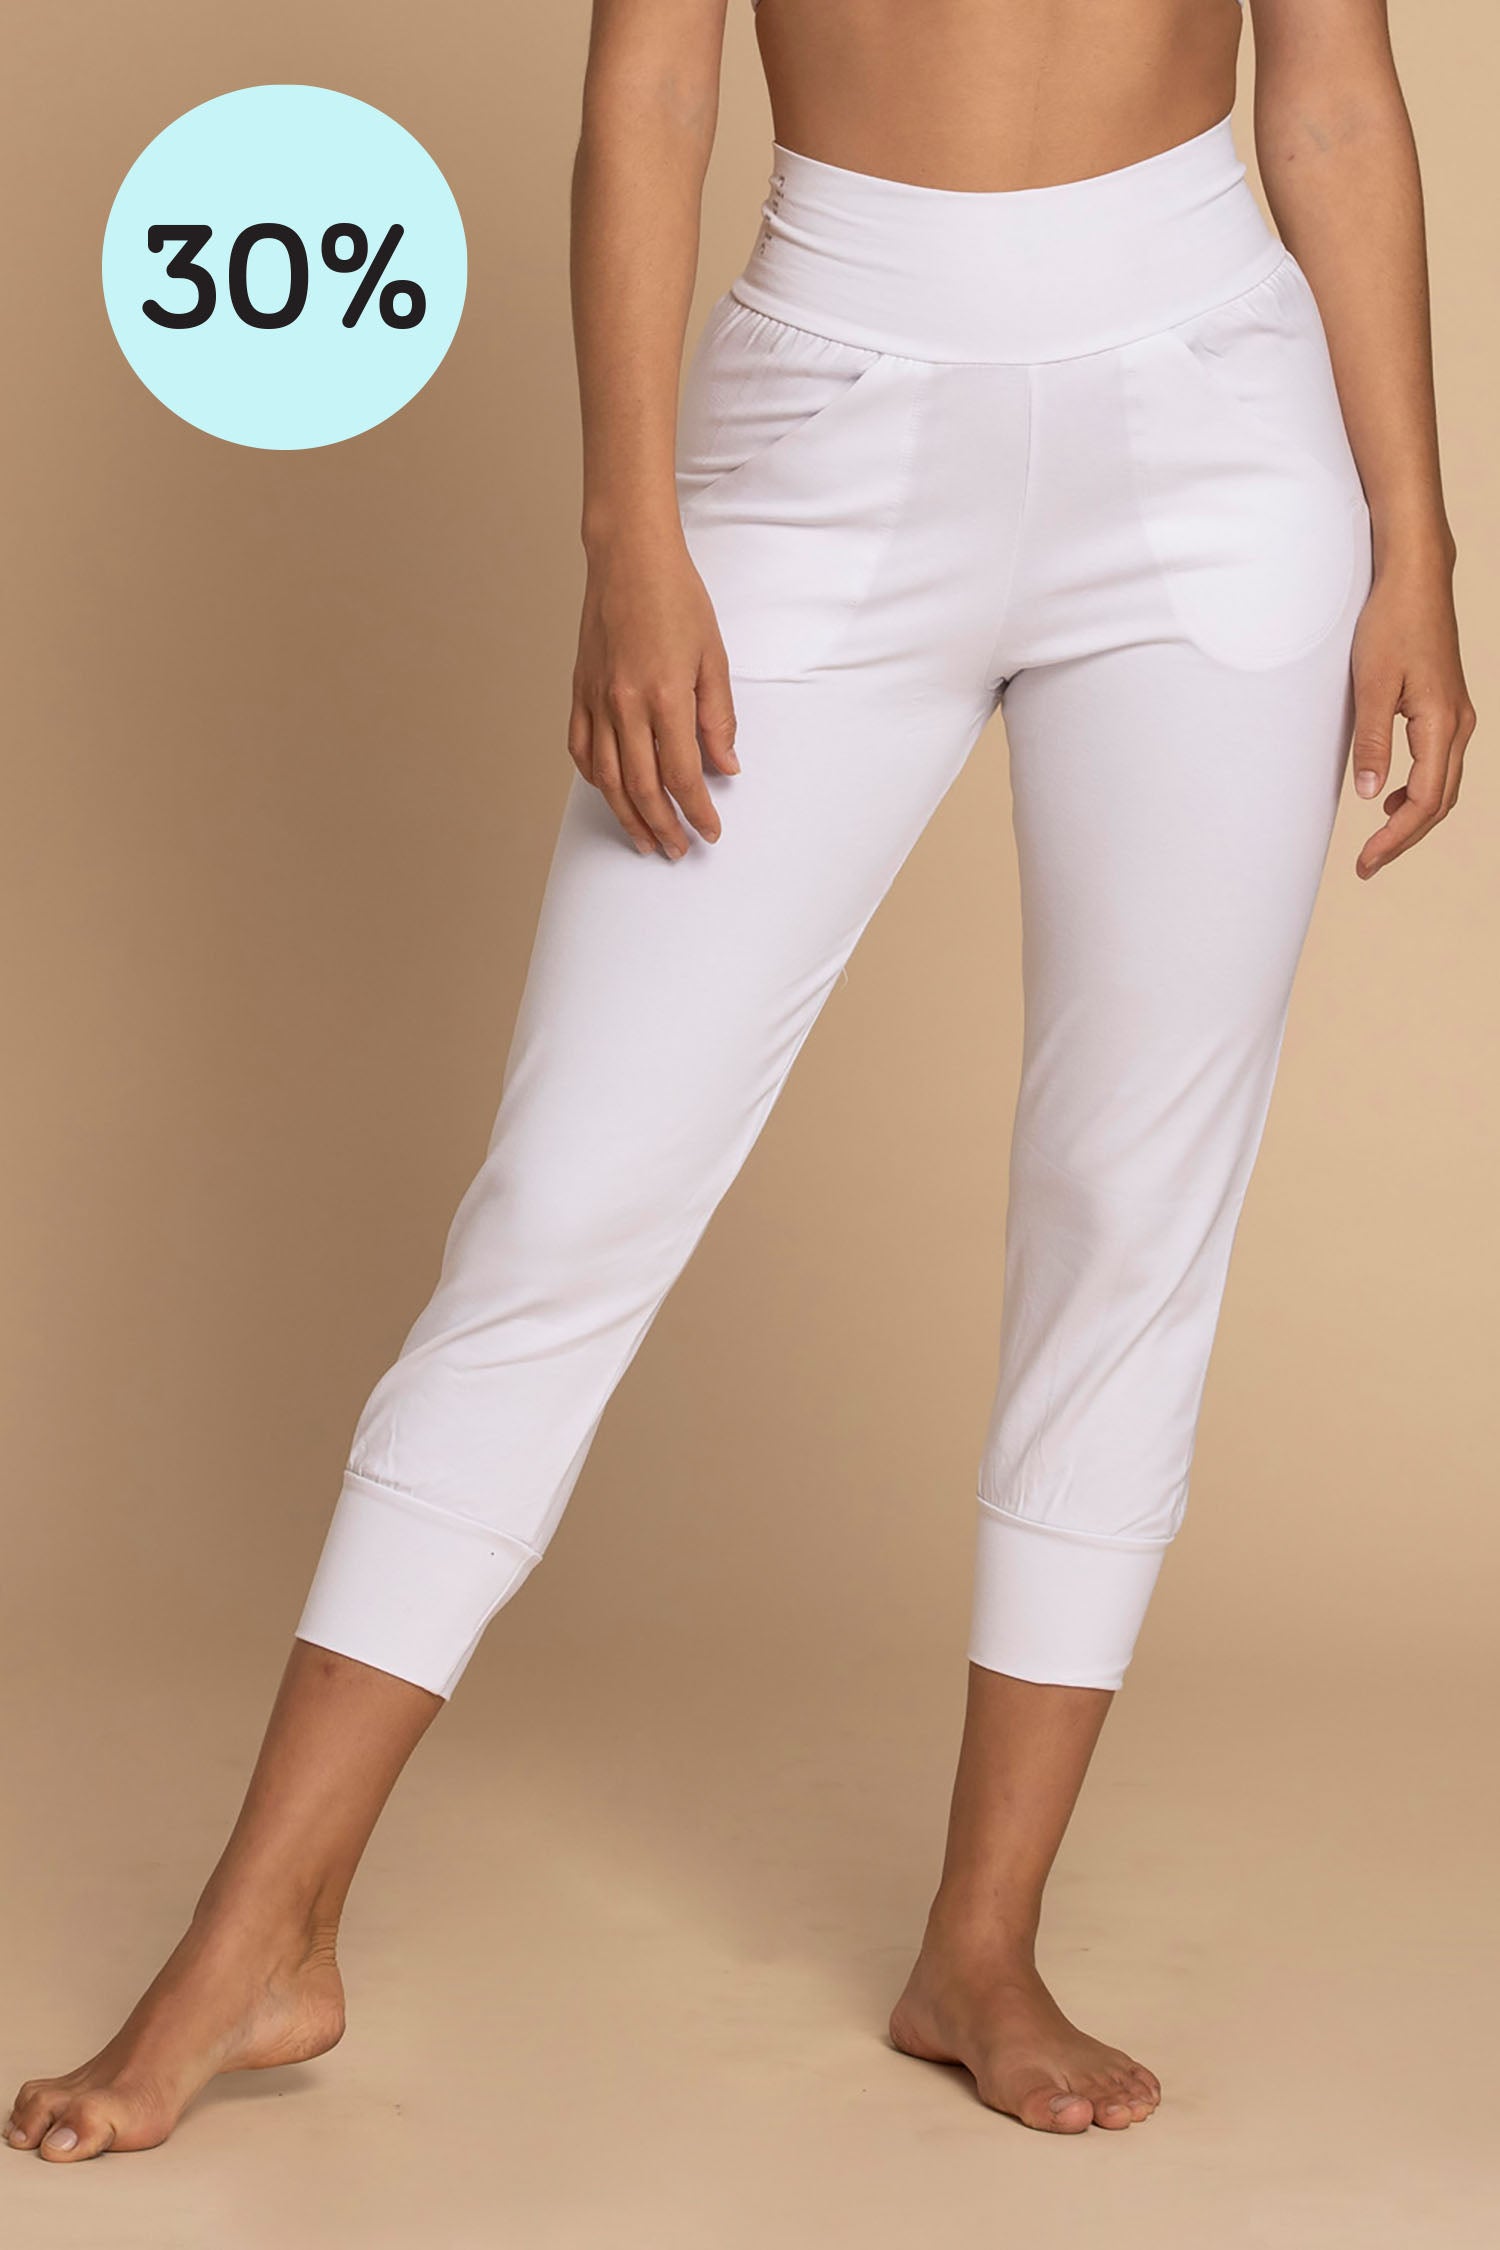 Yoga pants Relaxed Fit ecru (natural white), Online Shop